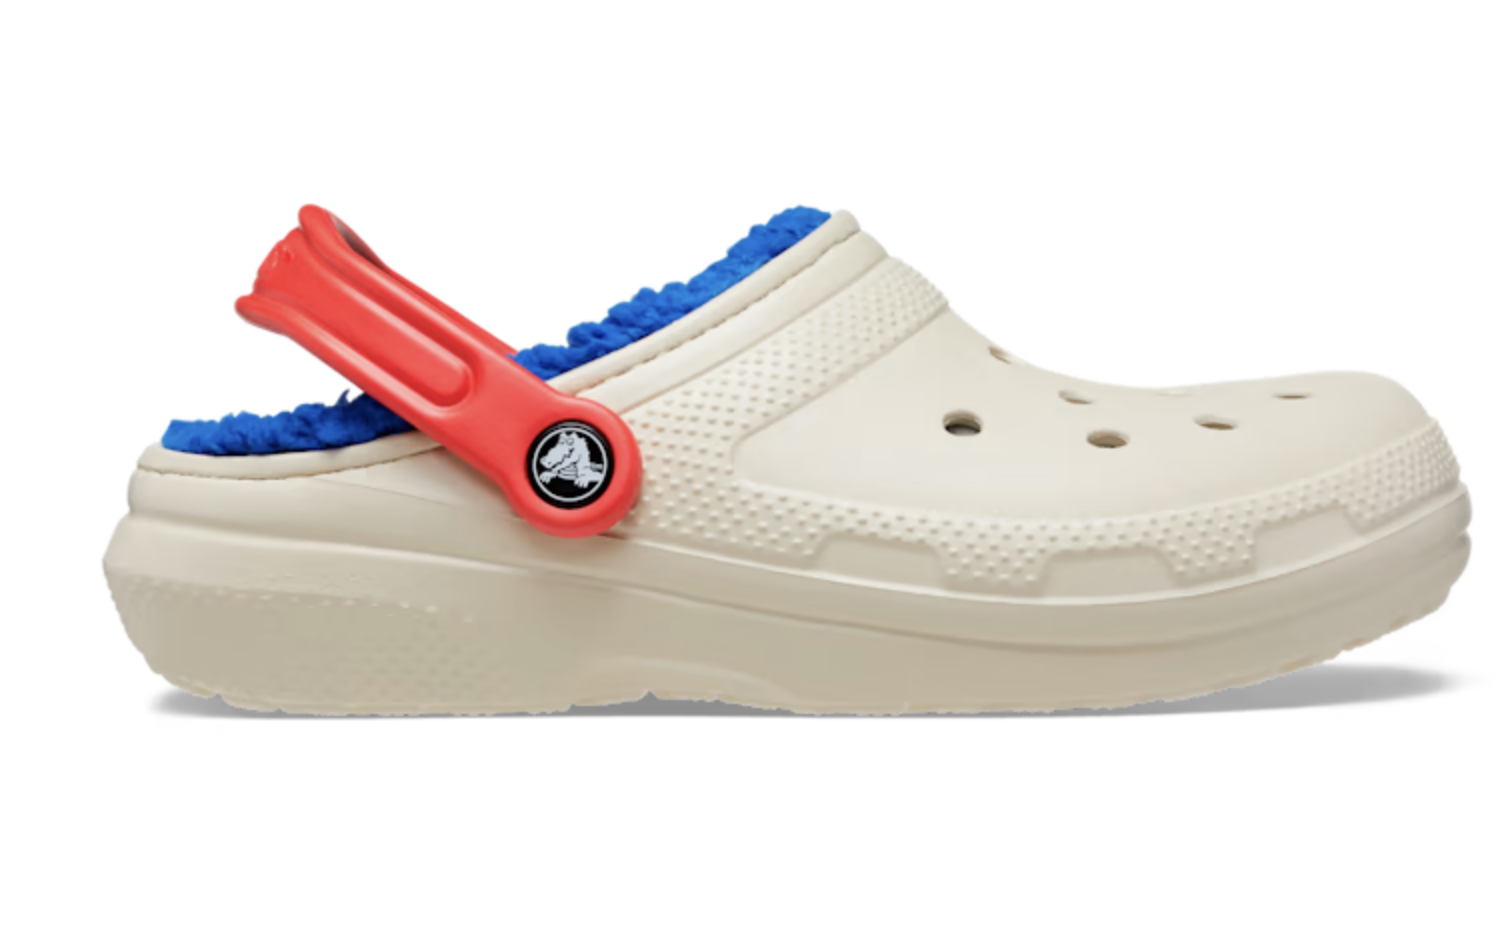 Crocs has Classic Lined Crocs (select colors) for $30 + Free shipping on $50+